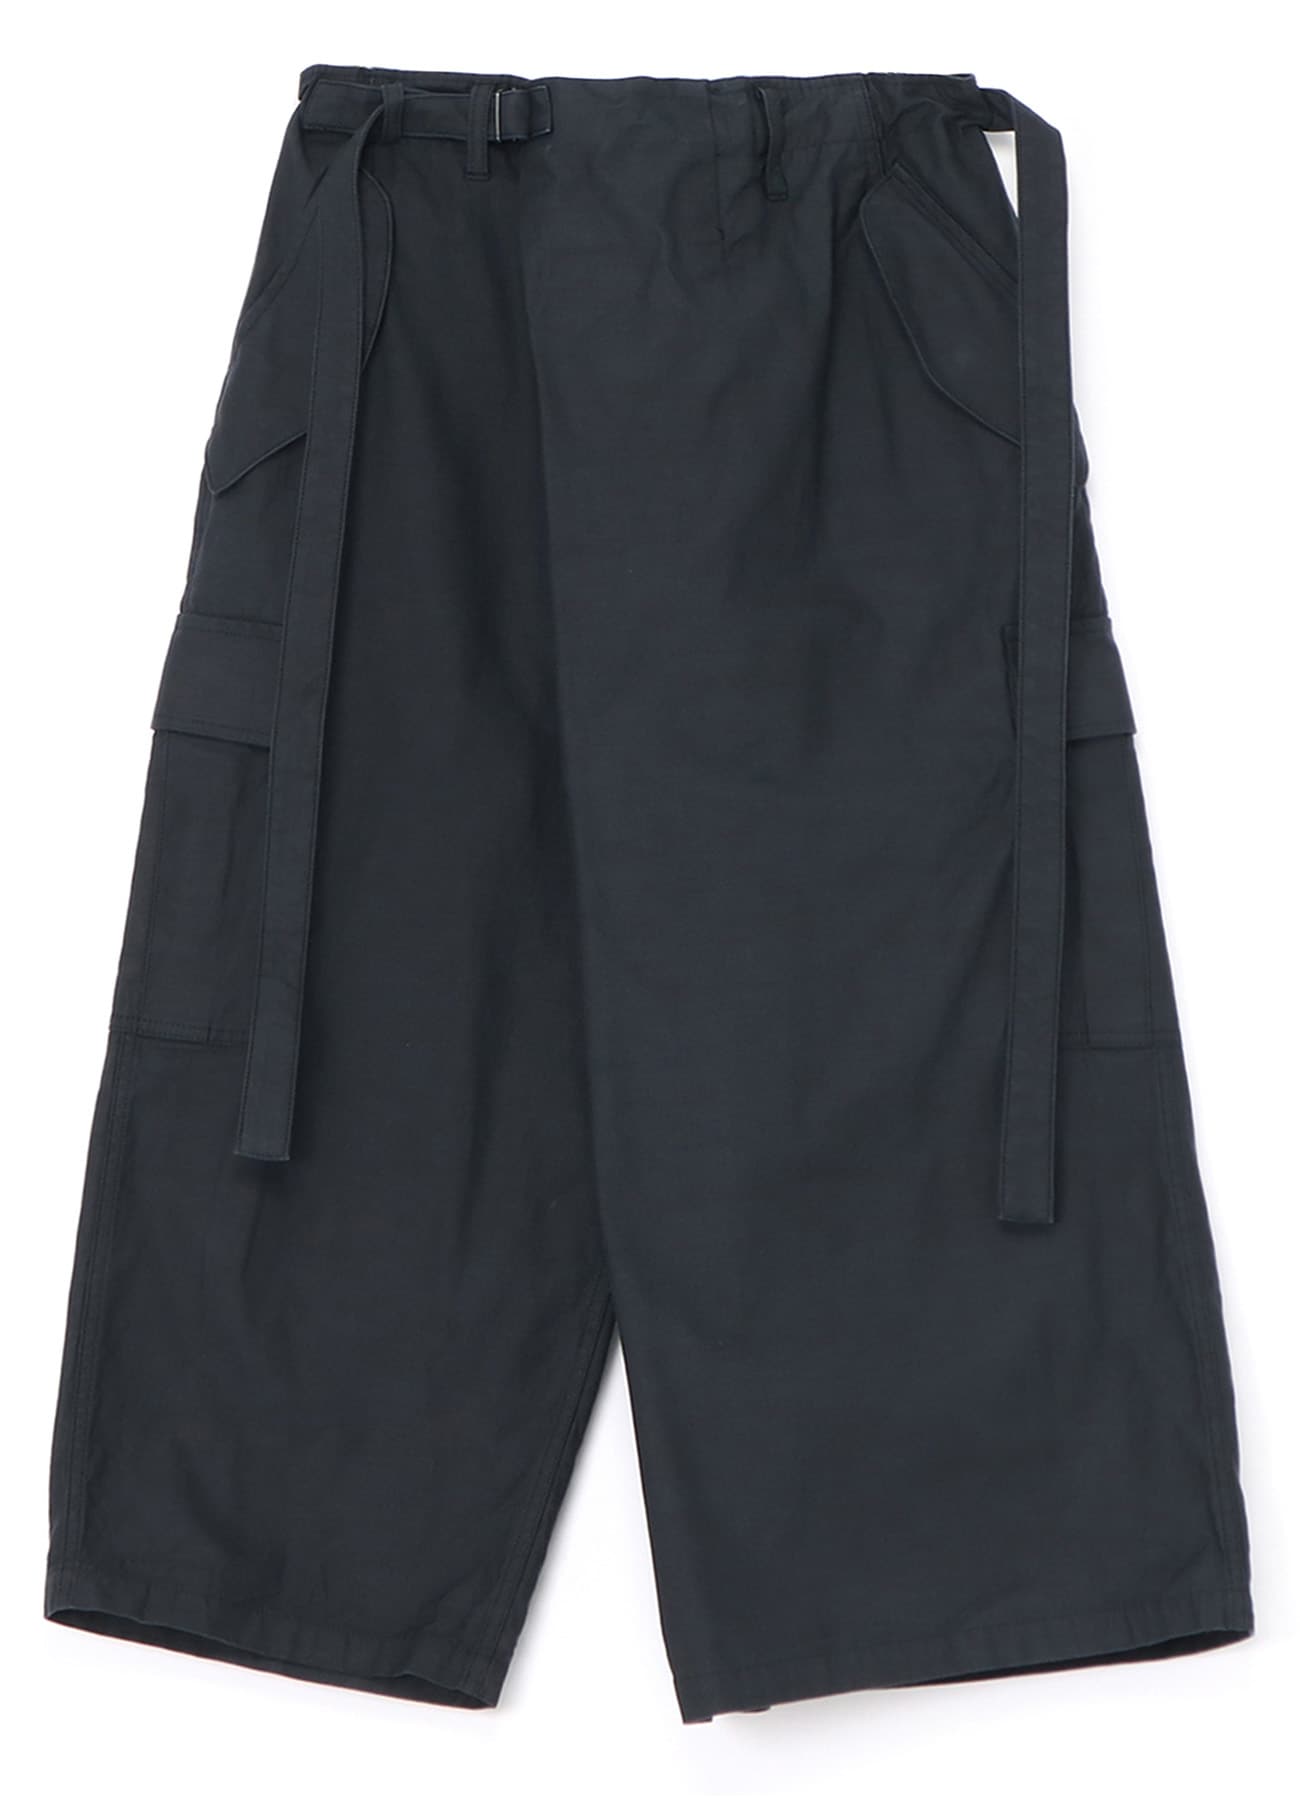 Y's-Black Name]BACKSIDE SULFURIZATION SATIN WRAP PANTS WITH